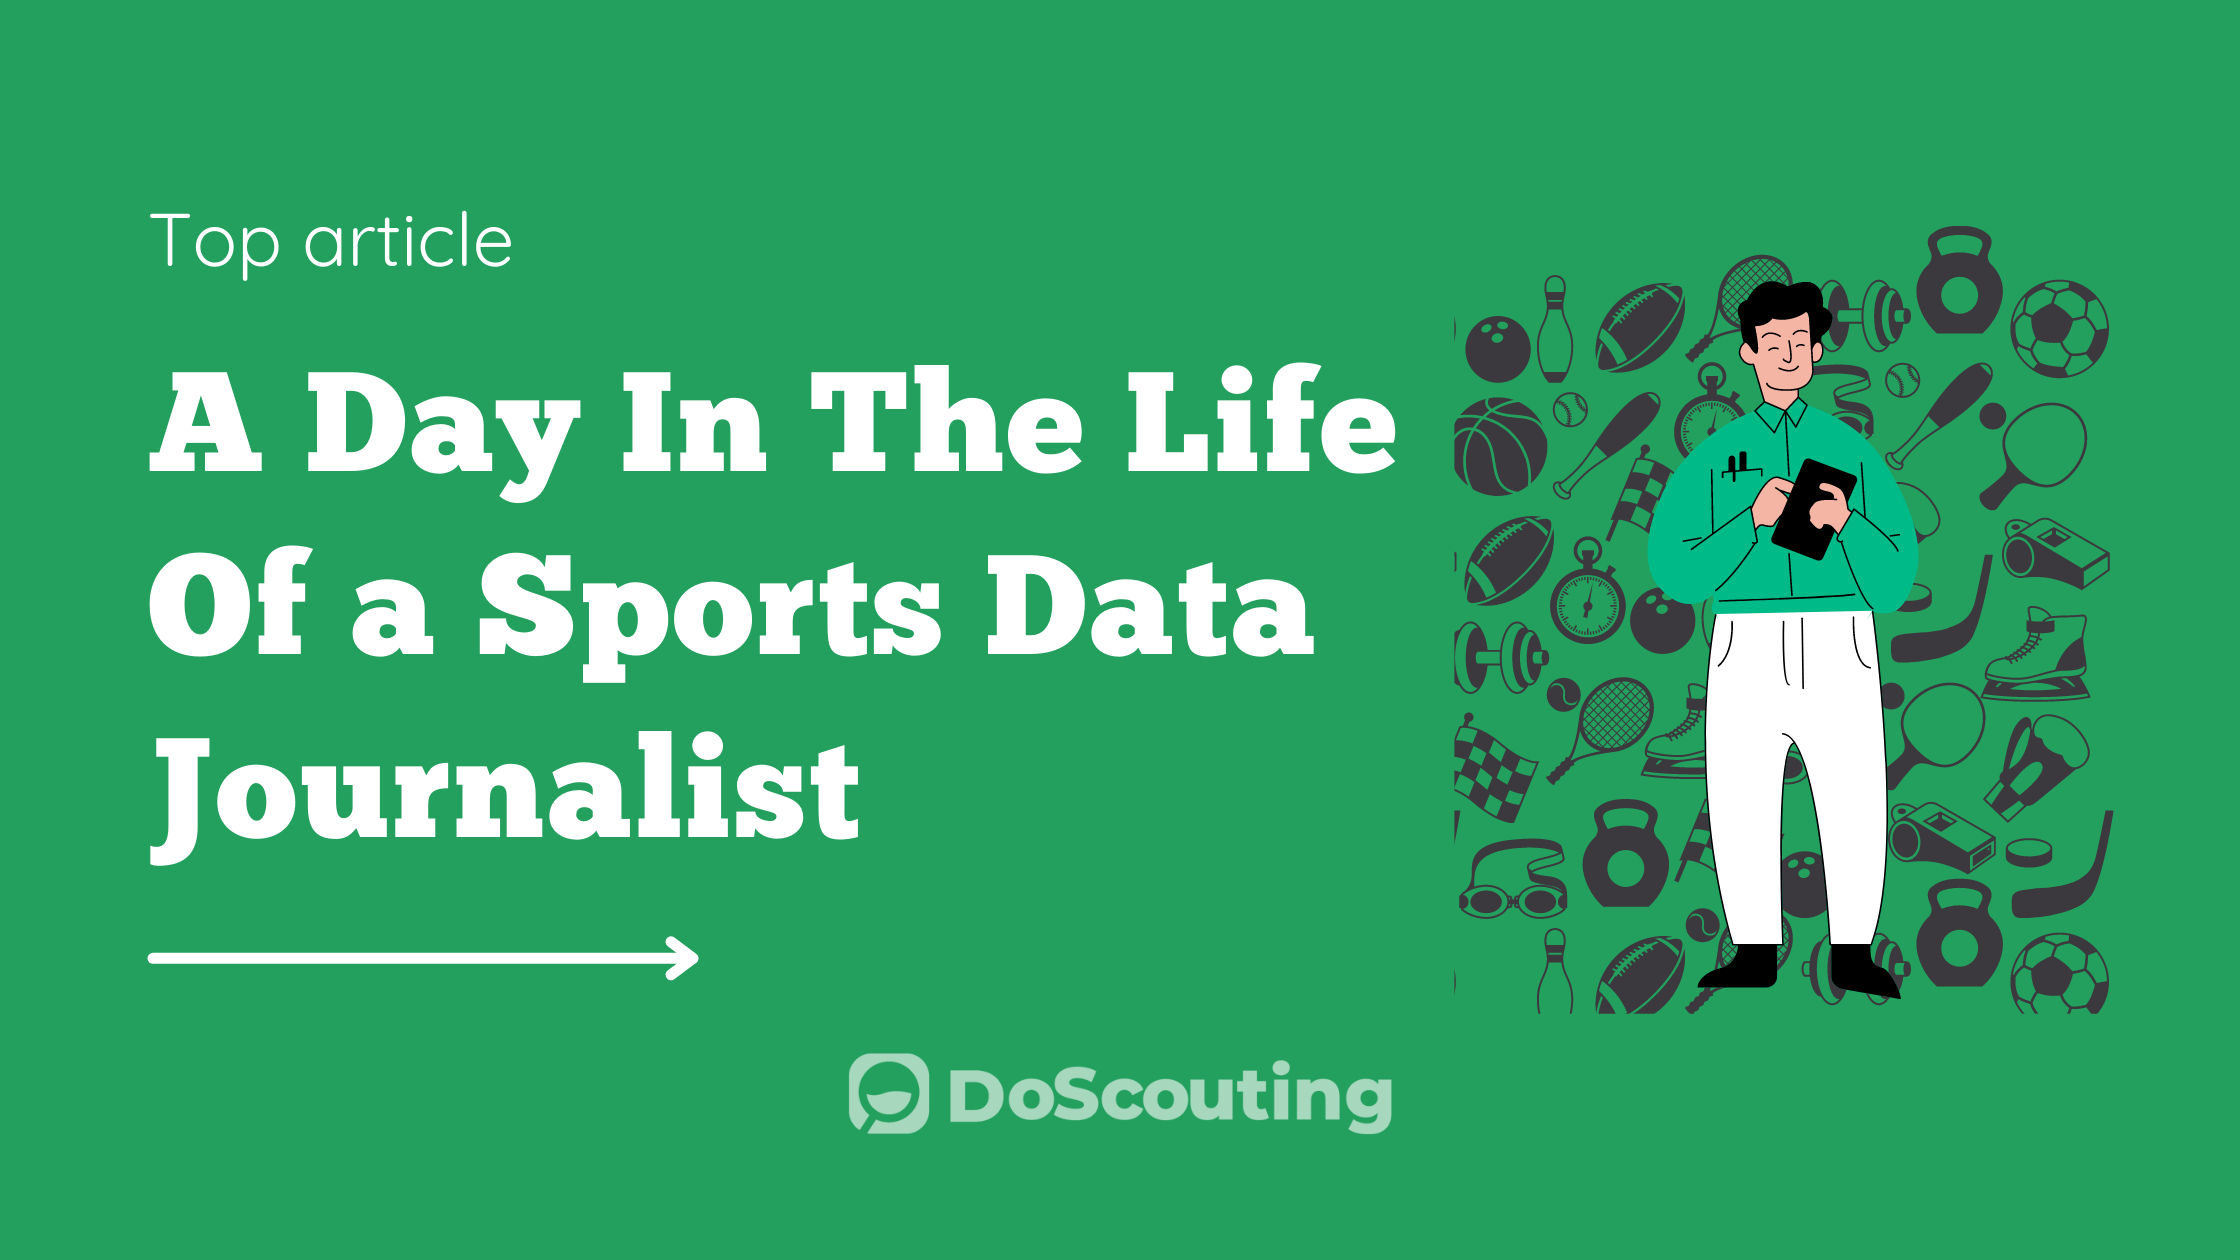 A Day in the Life of a Sports Data Journalist